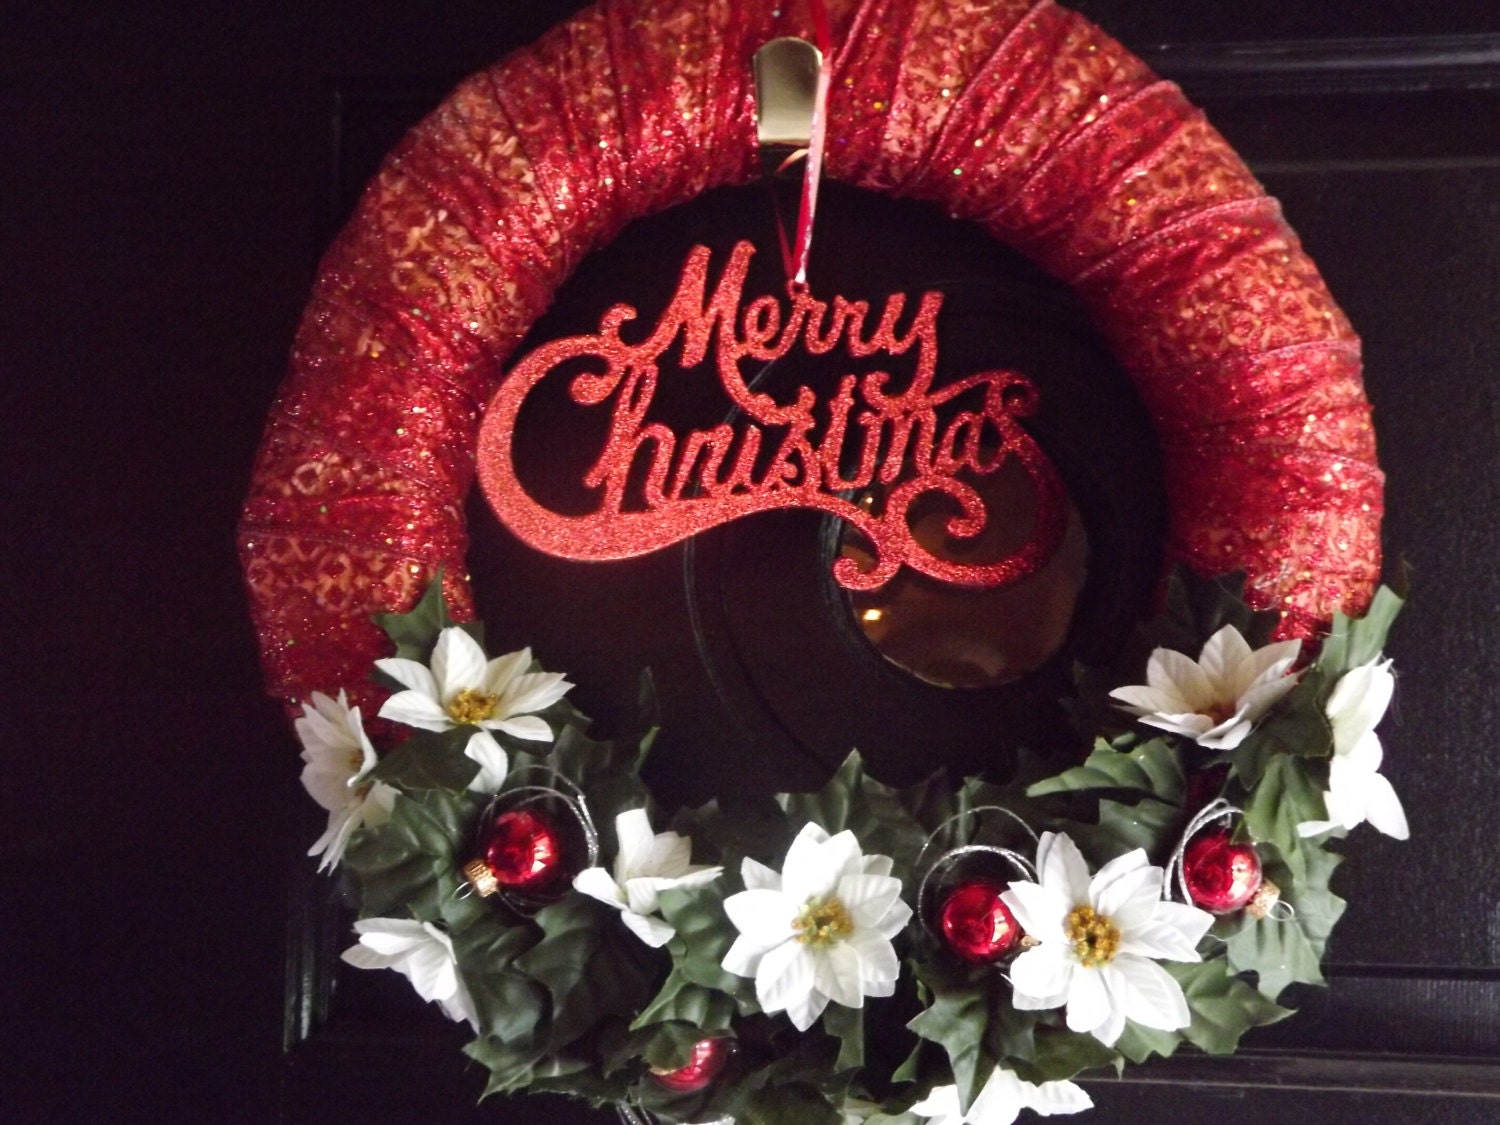 Merry Christmas greeting wreath with garland, white poinsettias, red mini ornaments, and silver accents